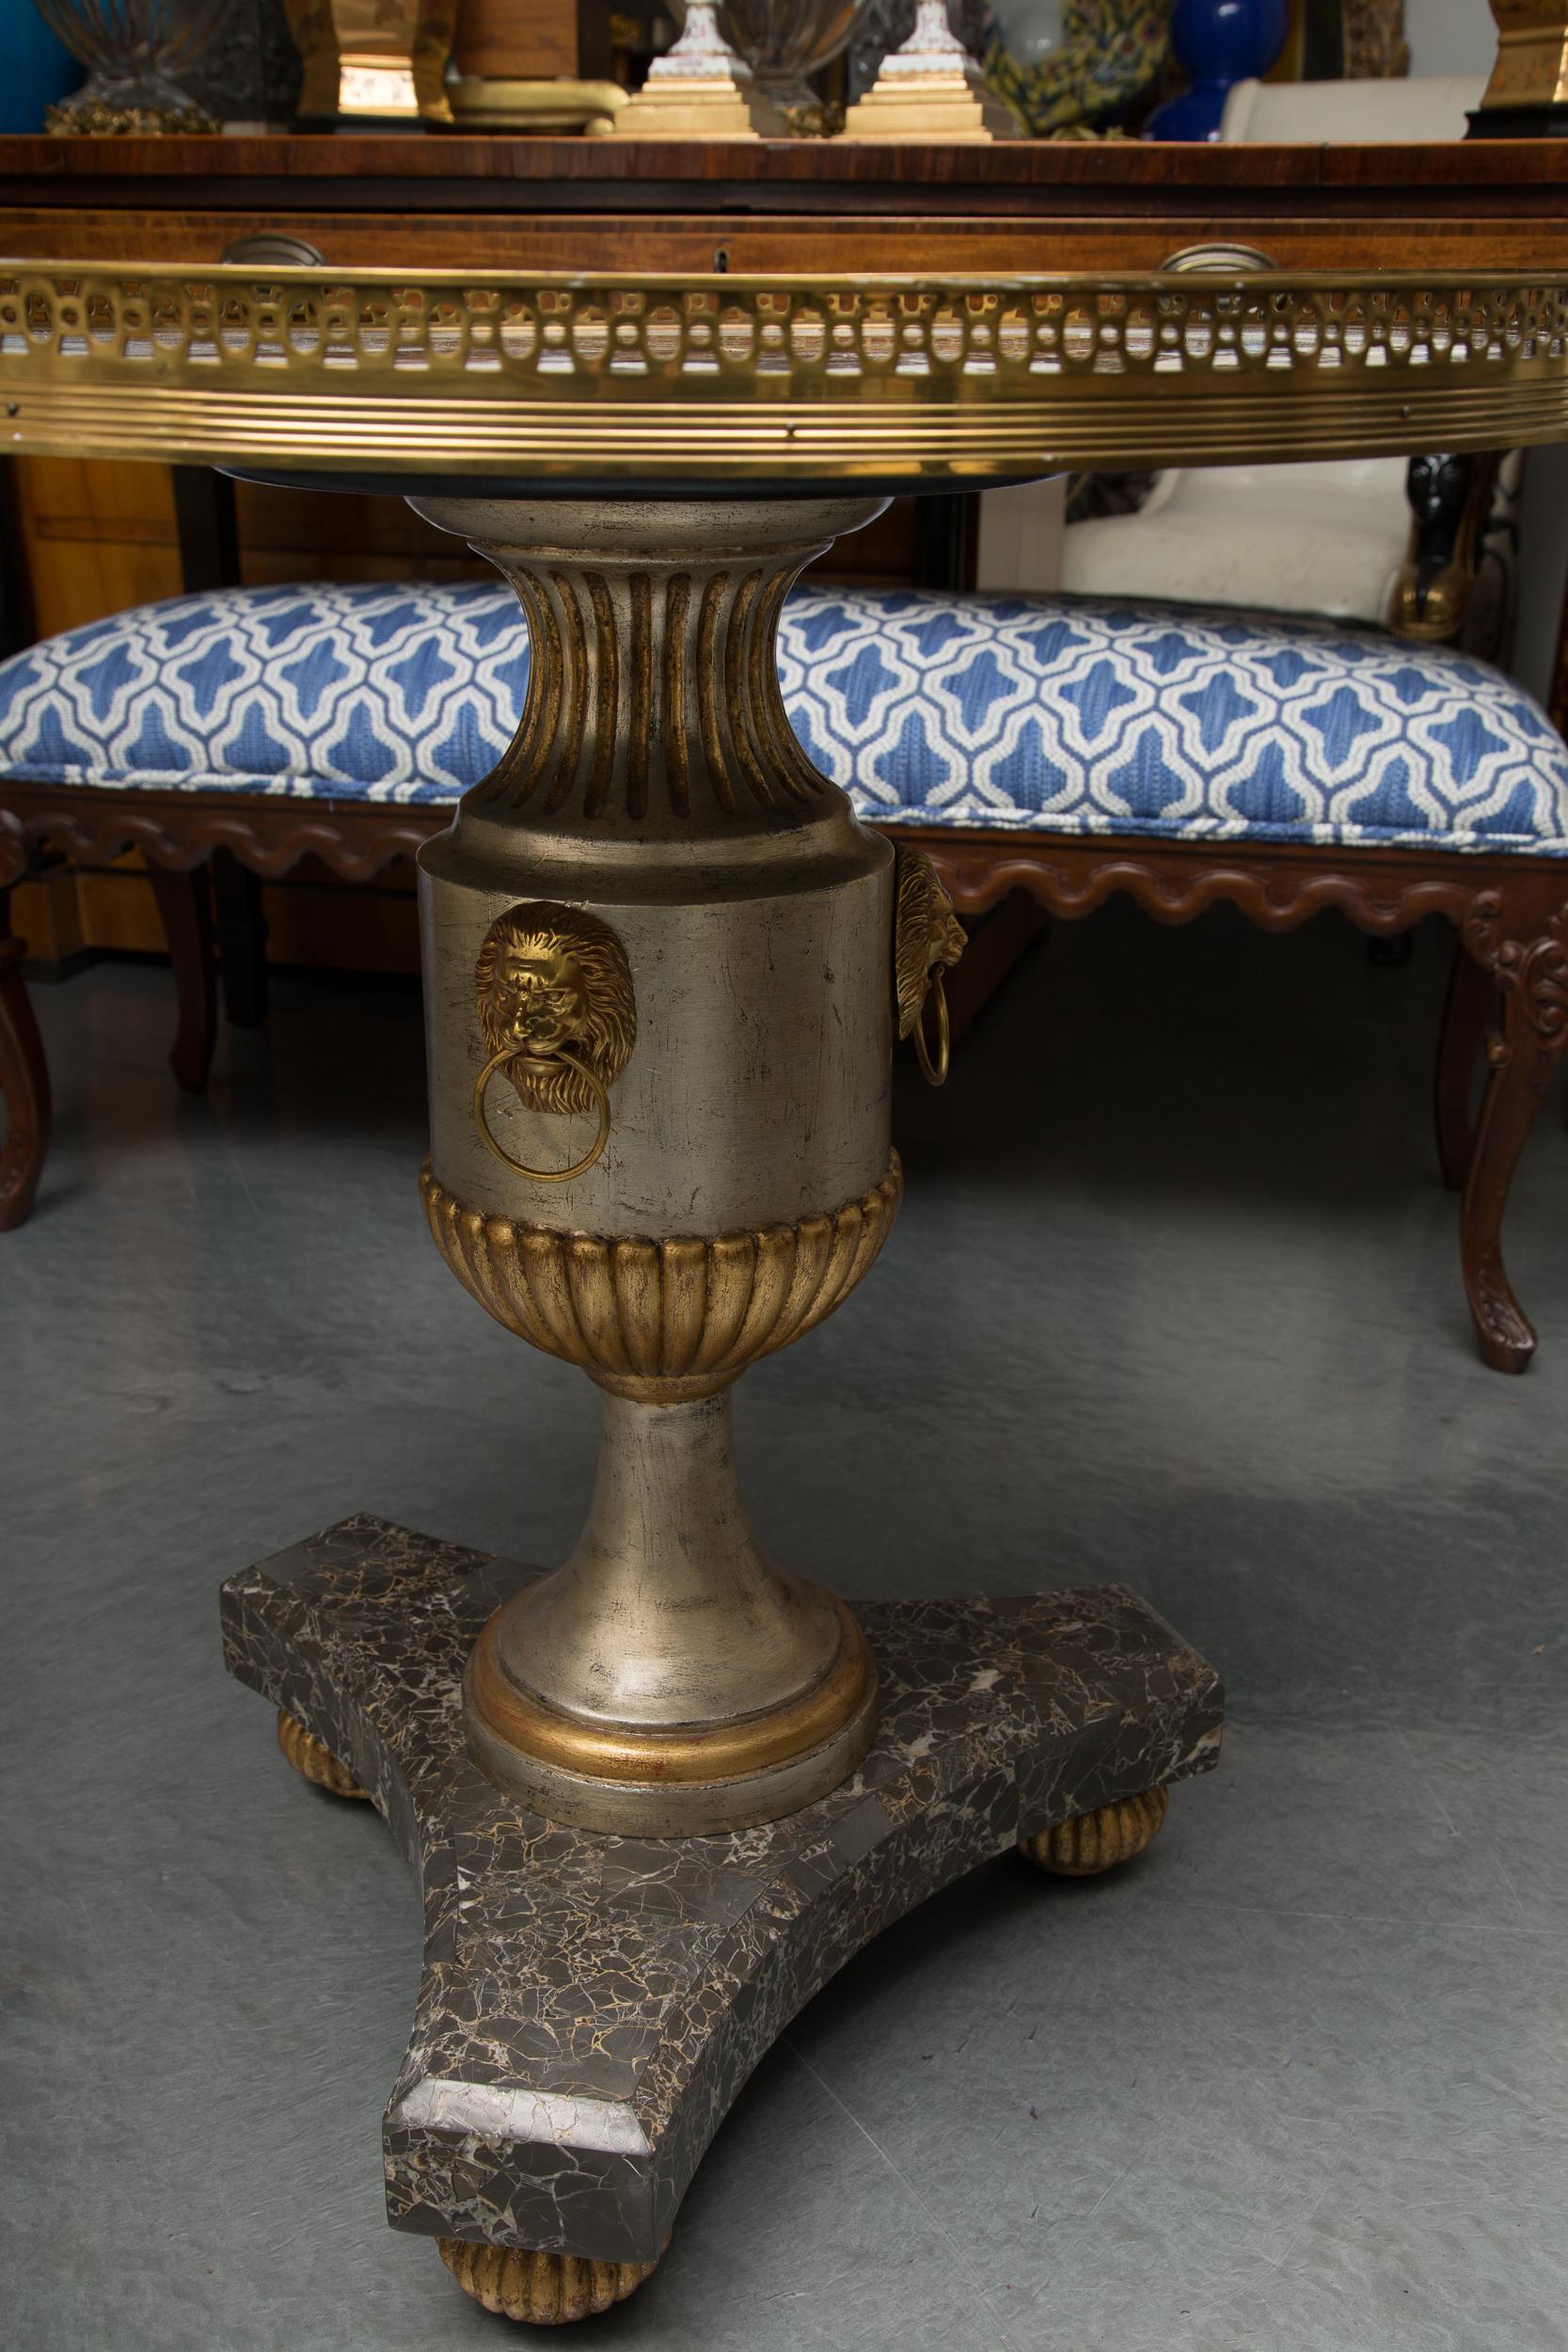 This is a decorative circular table with an inlaid marble top framed by a pierced brass gallery and supported by a silver-gilt baluster pedestal situated on a tripartite marble plinth supported by gilt ribbed bun feet, circa 1950.